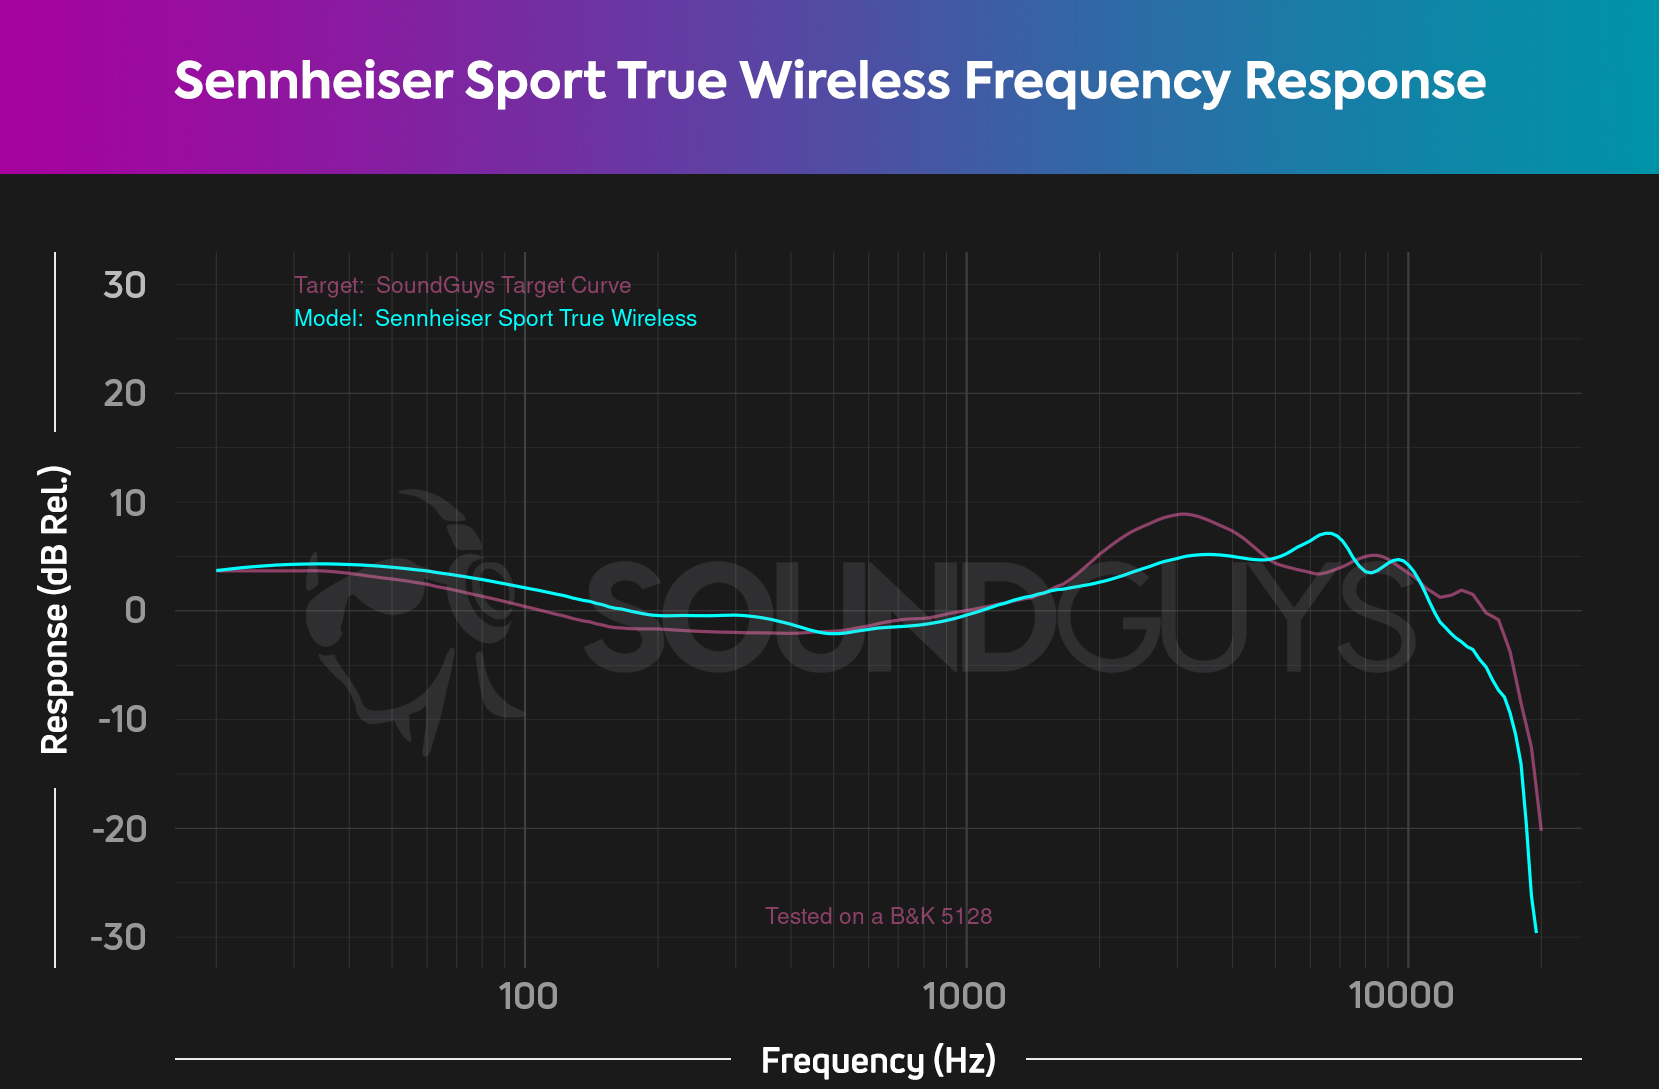 Sennheiser Sport True Wireless frequency response chart relative to the SoundGuys Target Curve.